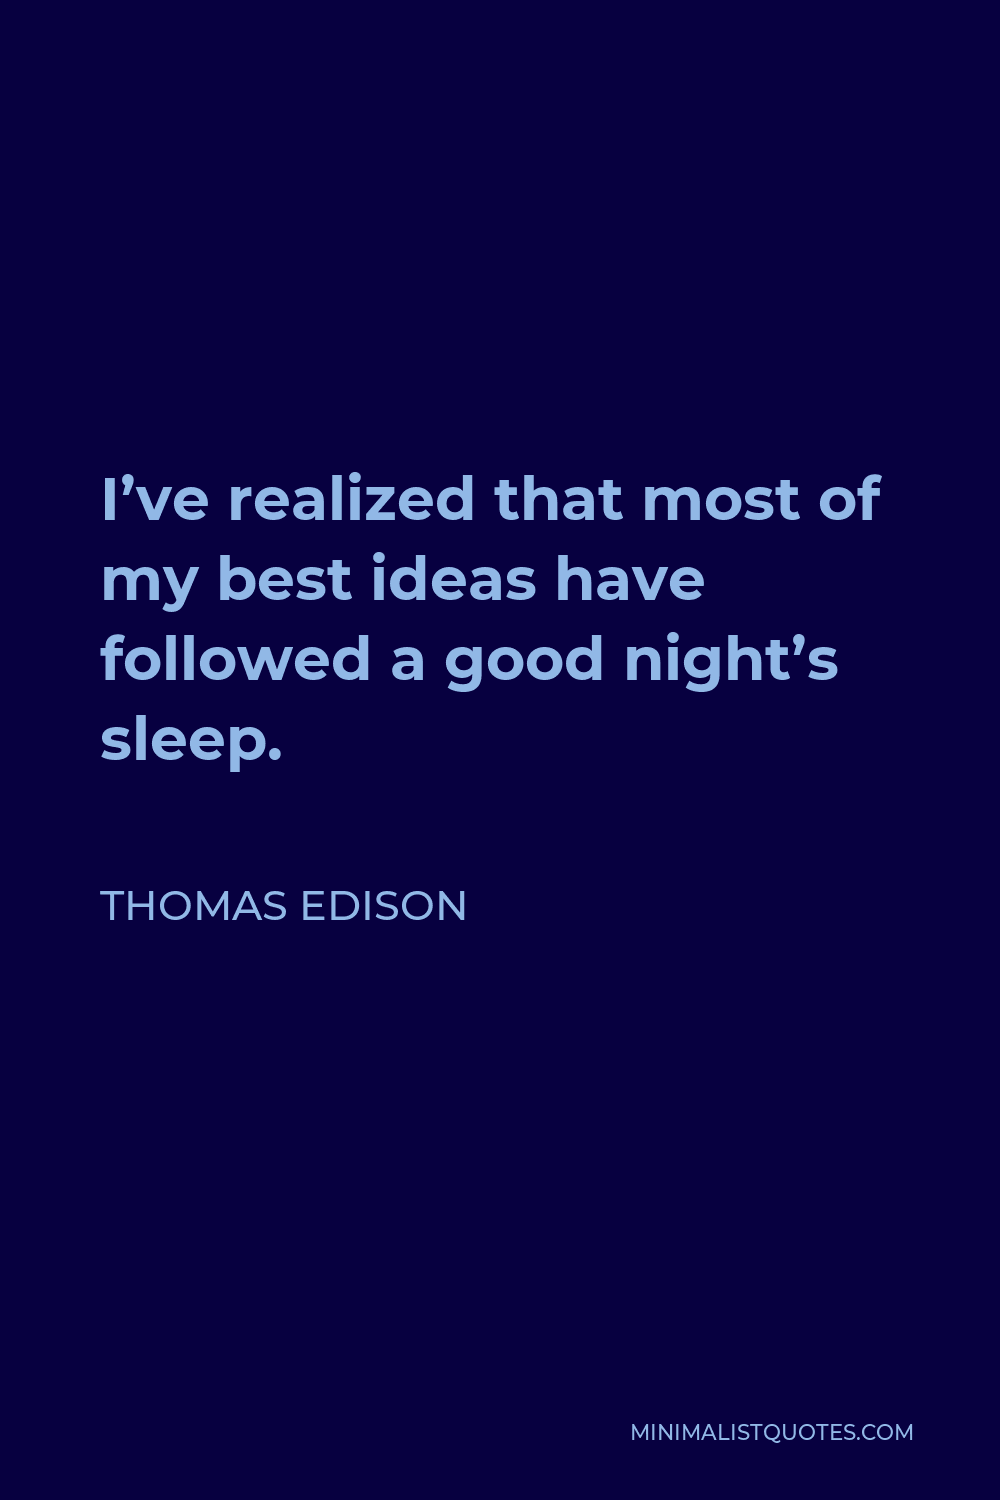 Thomas Edison Quote - I’ve realized that most of my best ideas have followed a good night’s sleep.